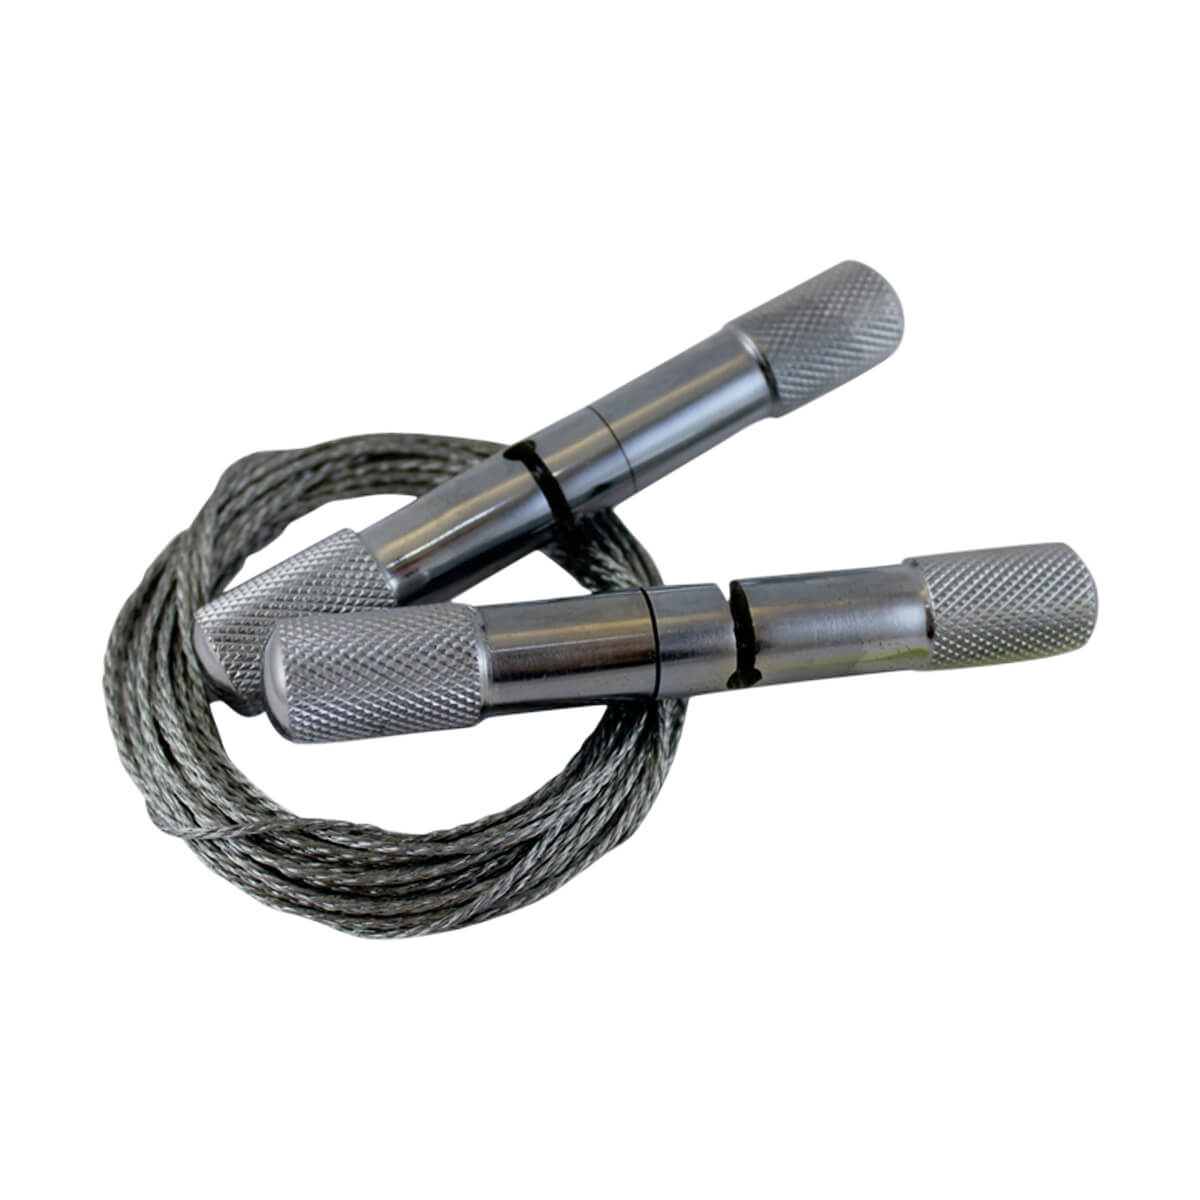 Wire Saw and Handles Kit